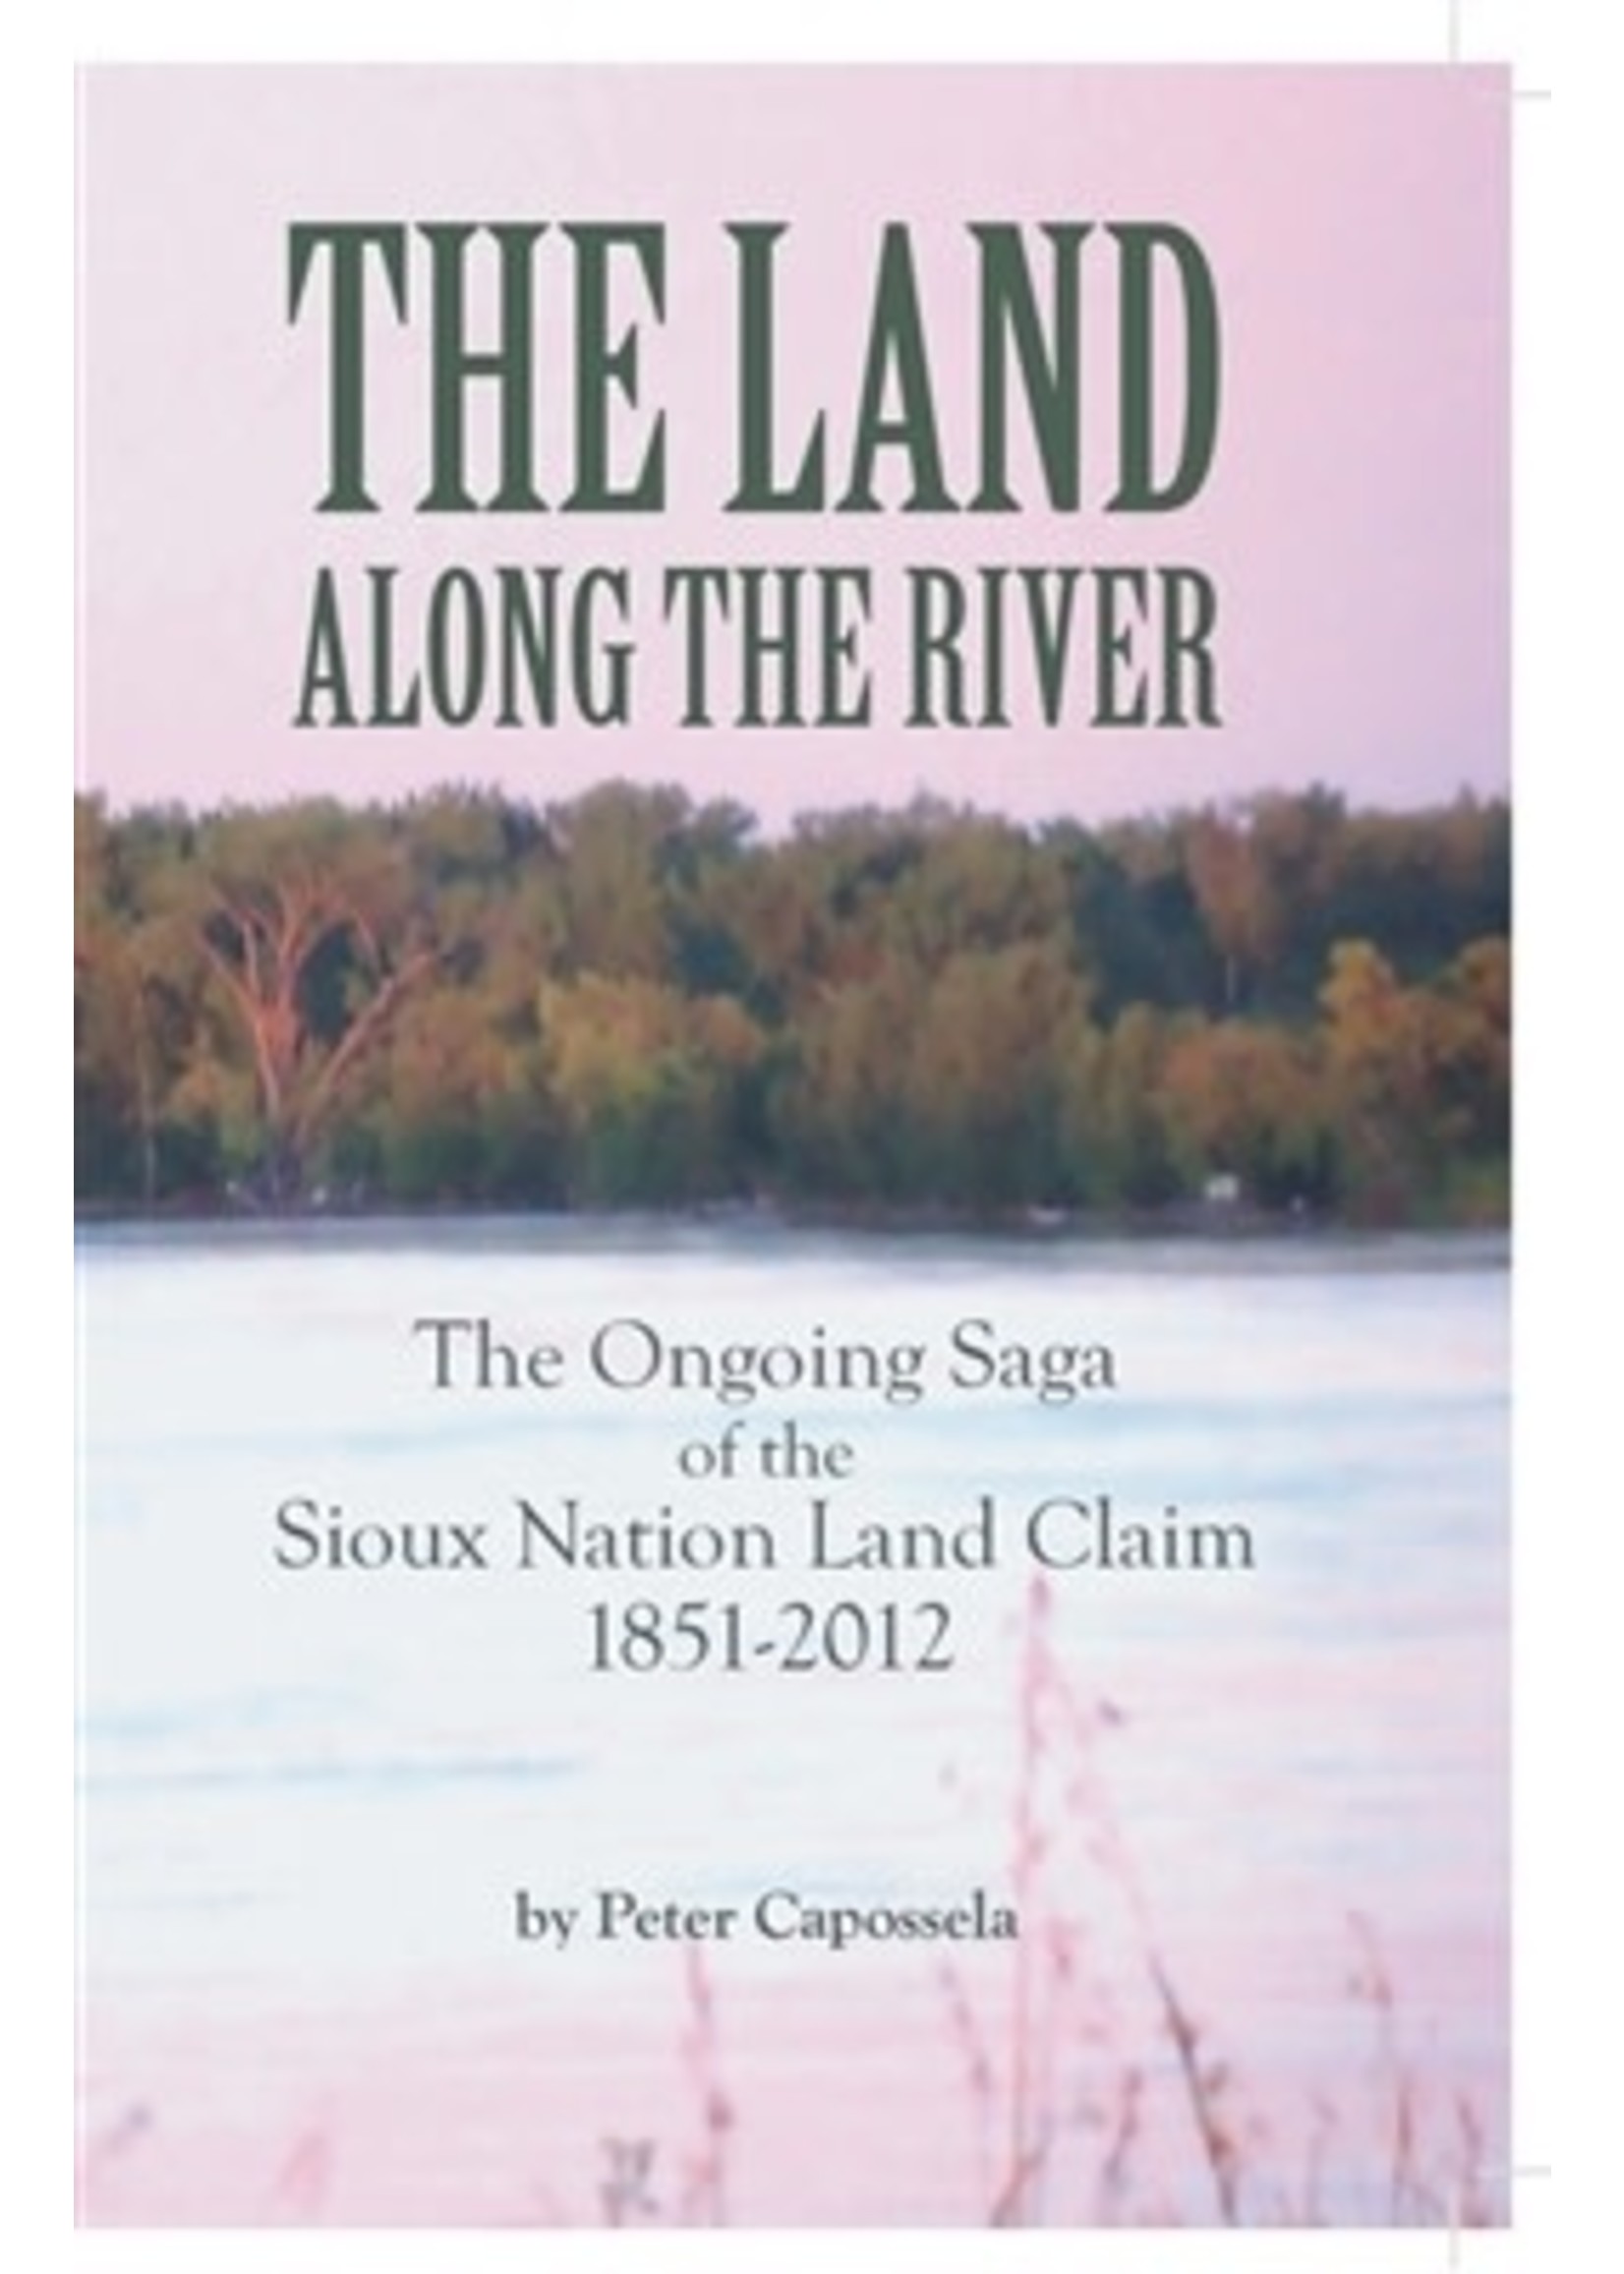 The Land Along the River: The Ongoing Saga of the Sioux Nation Land Claim 1851-2012